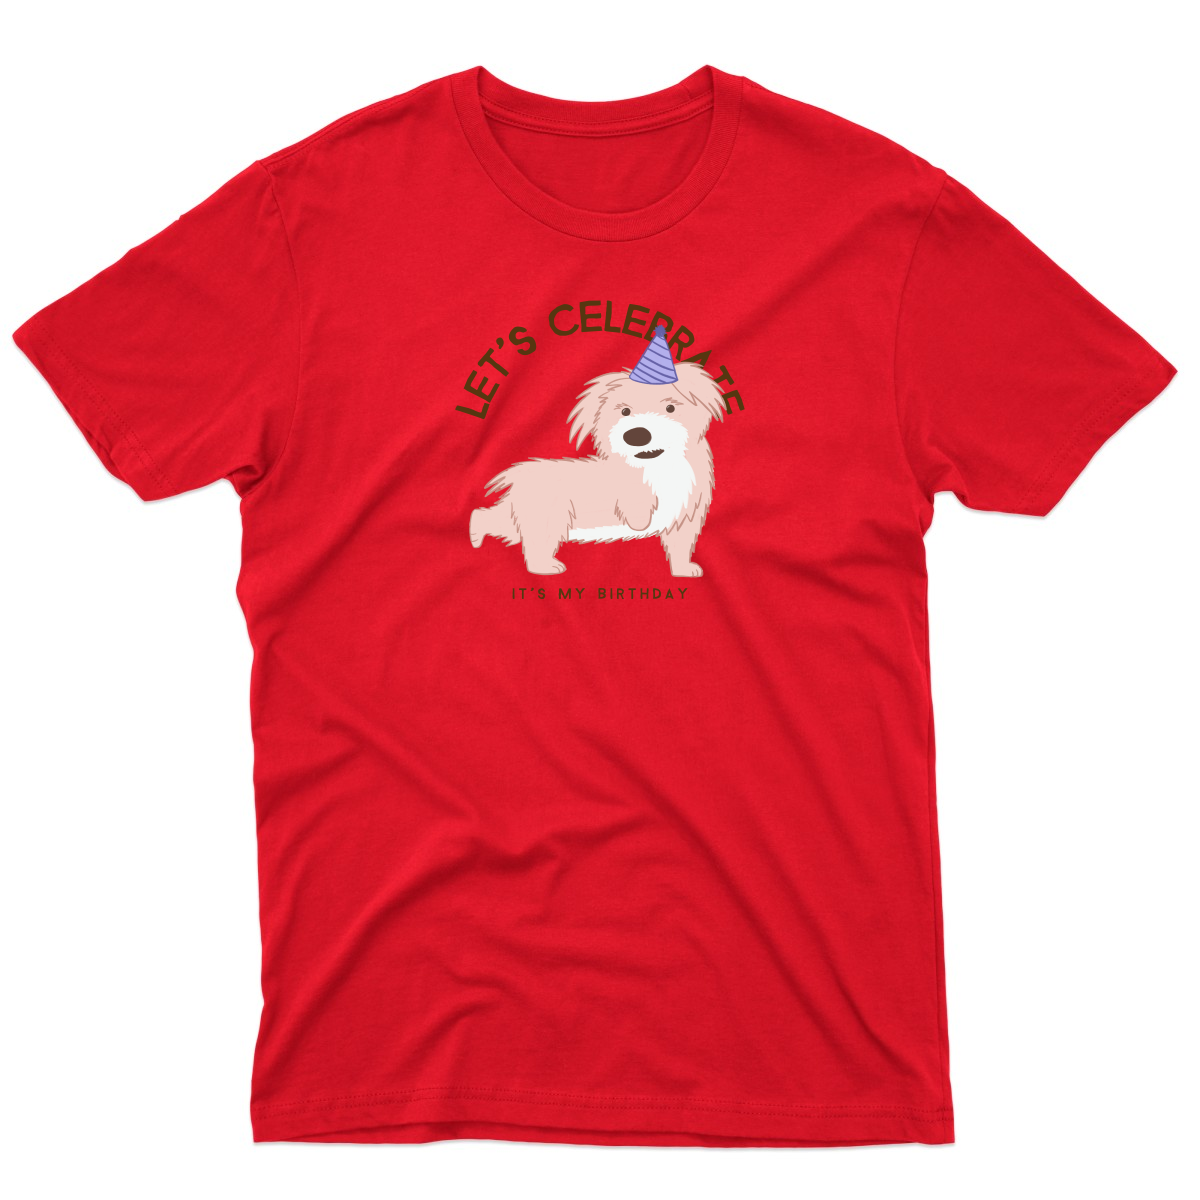 Let's Celebrate It is My Birthday Men's T-shirt | Red